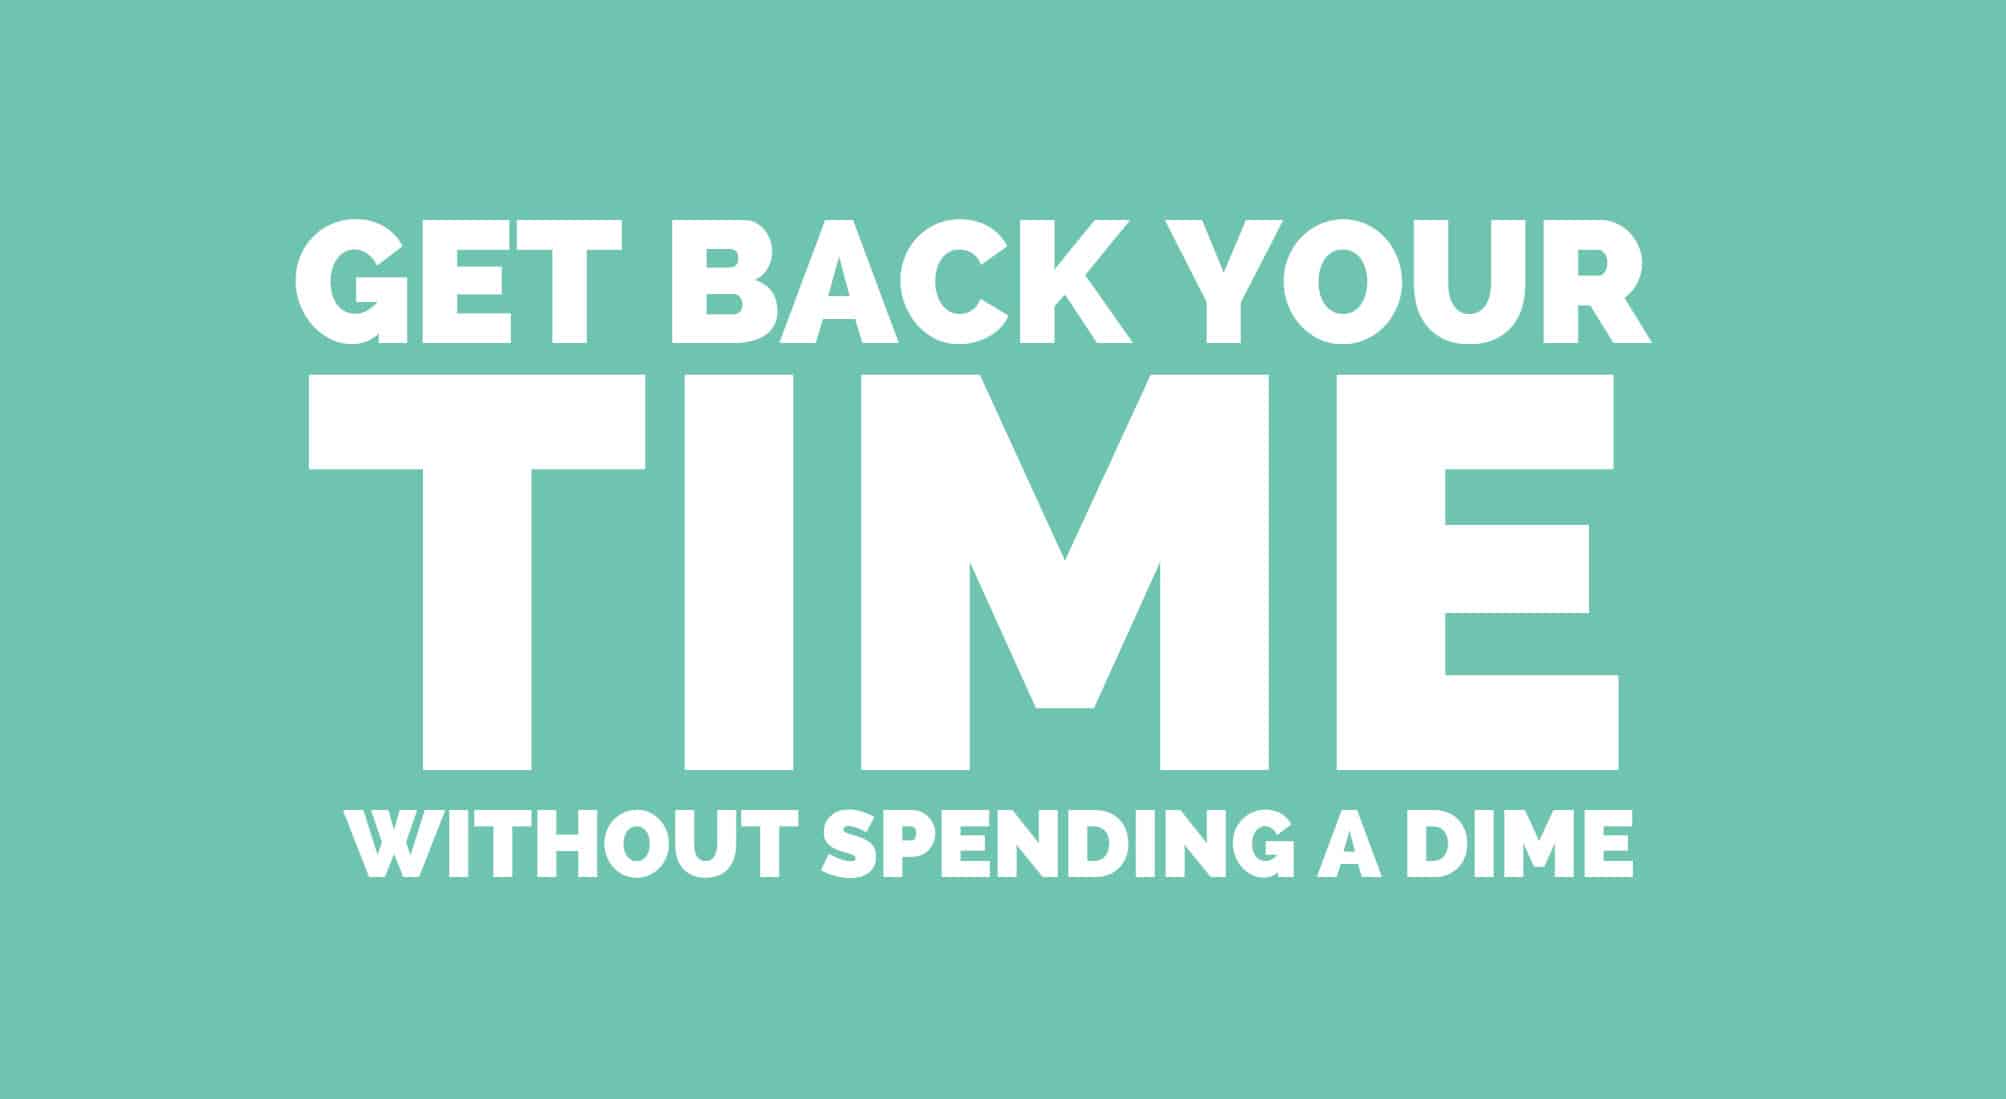 GET BACK YOUR TIME WITHOUT SPENDING A DIME